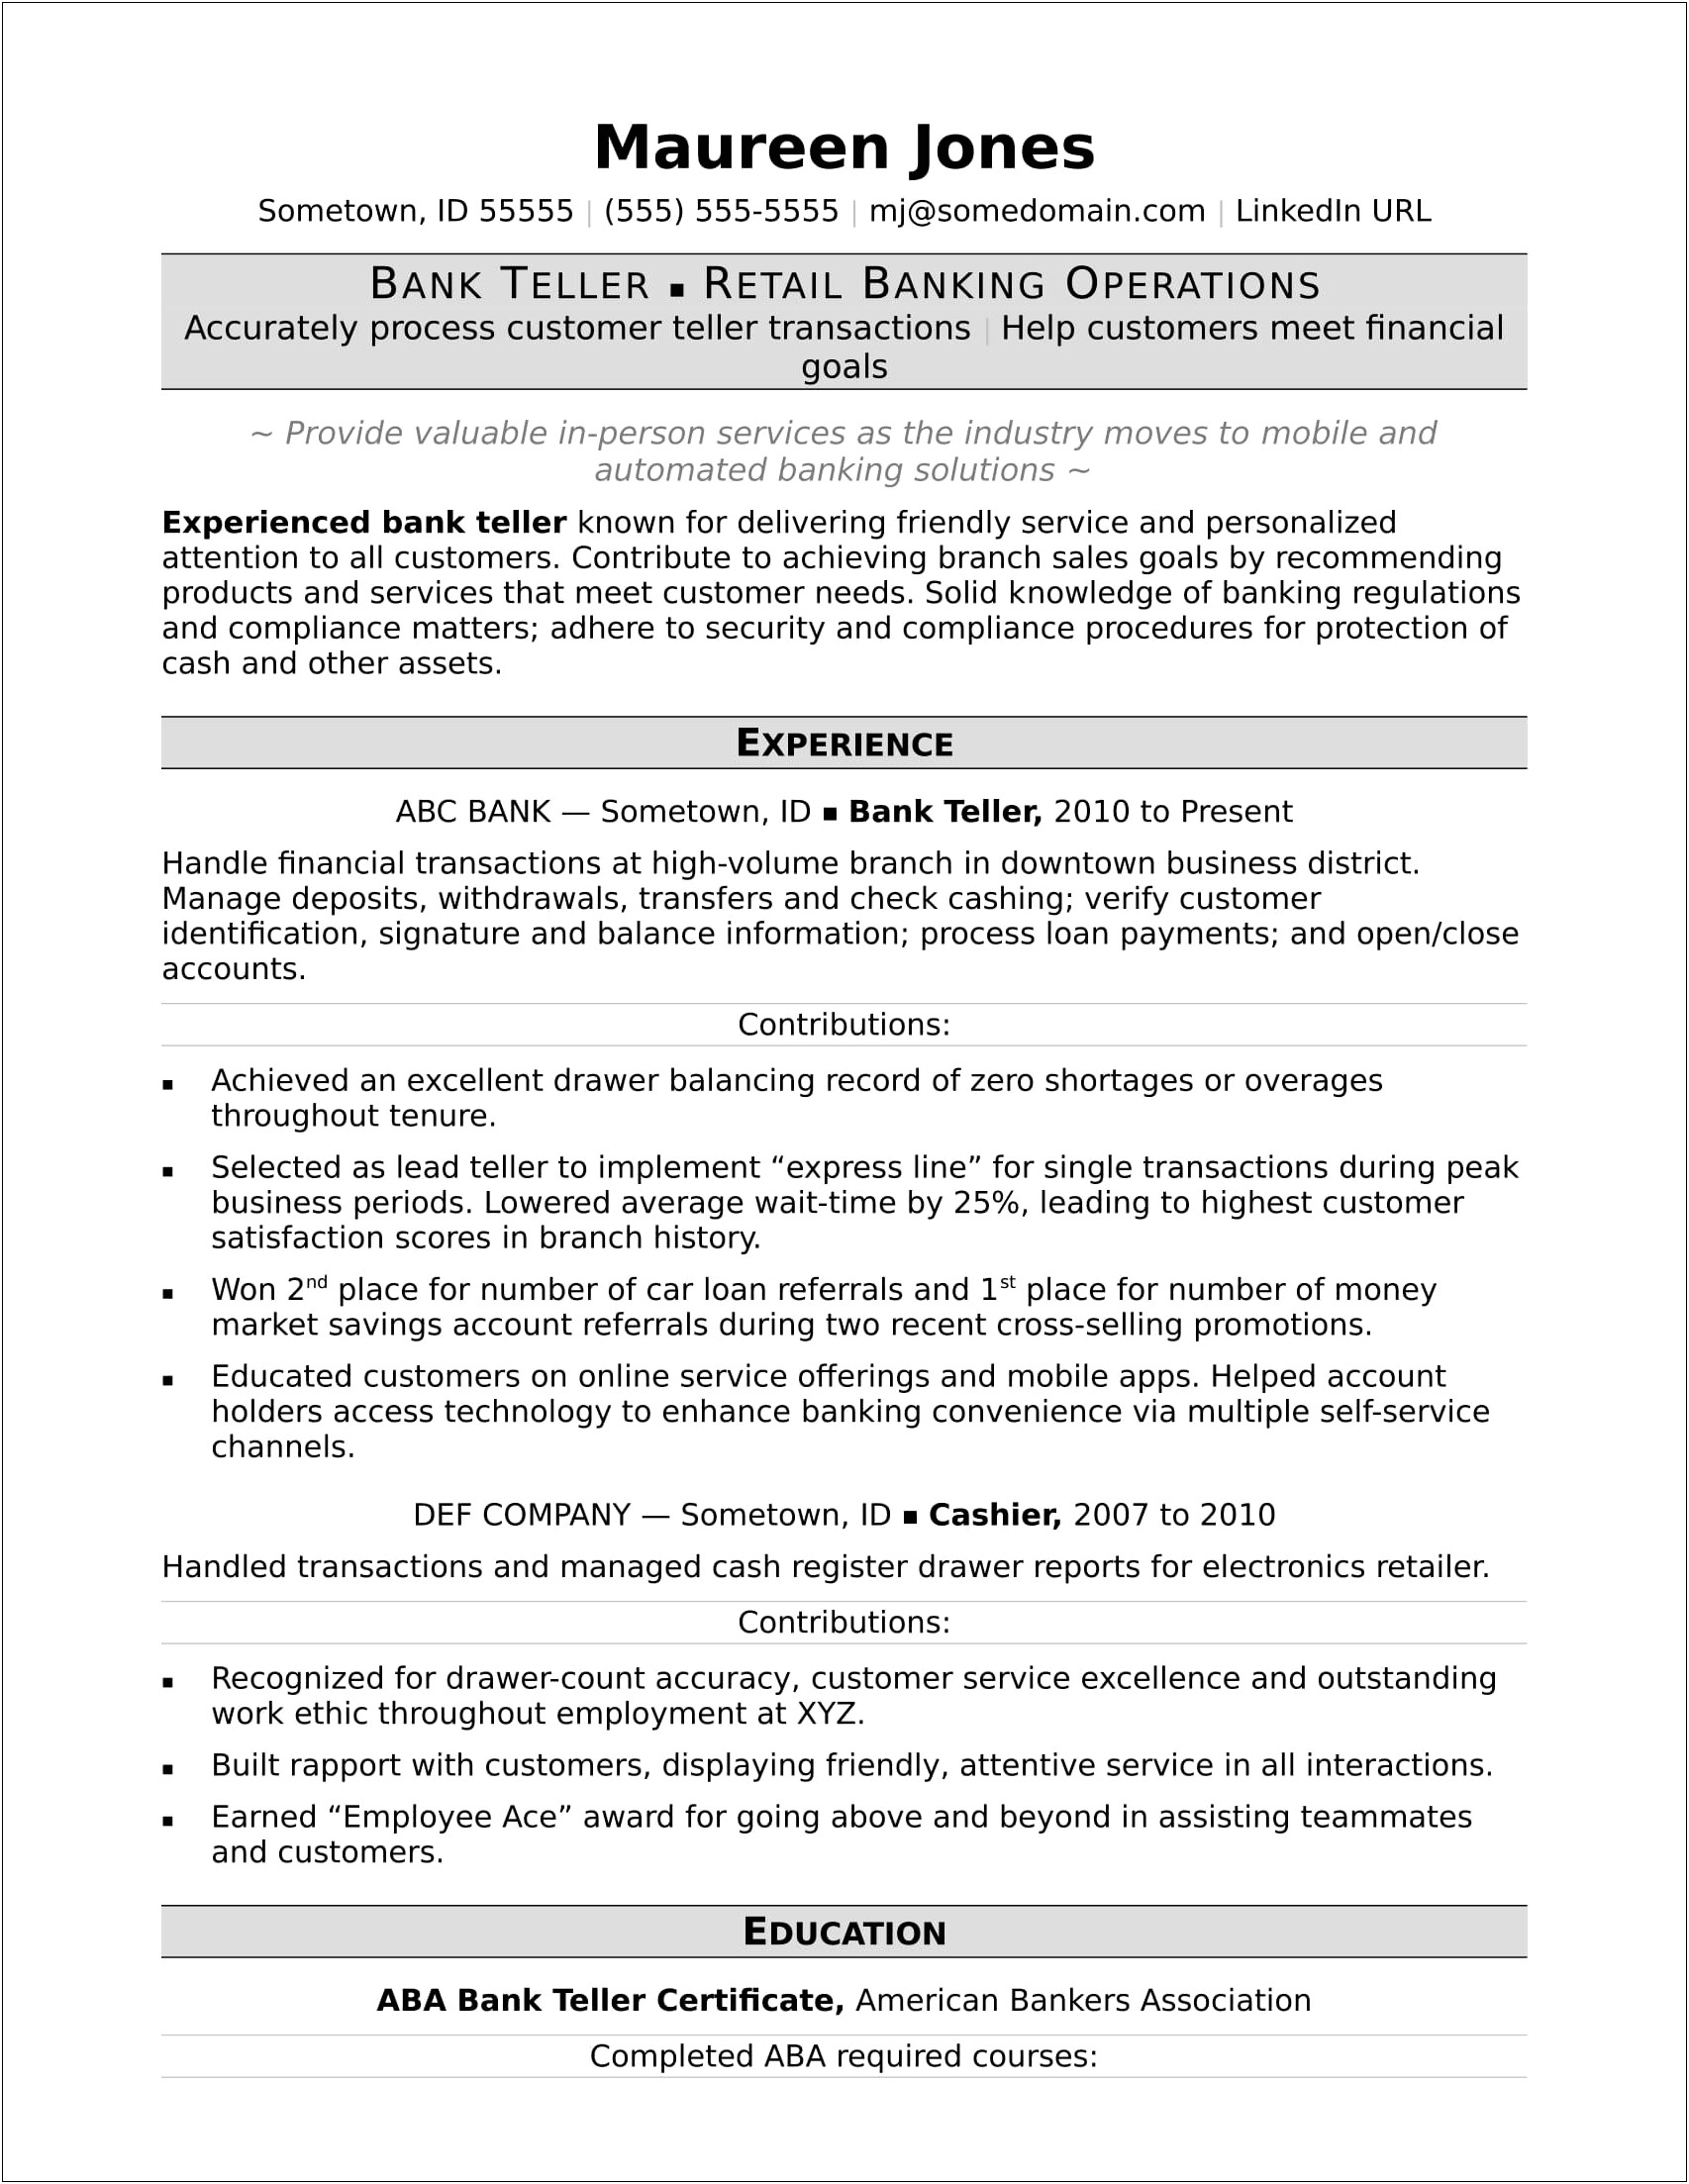 Resume And Skills For A Teller